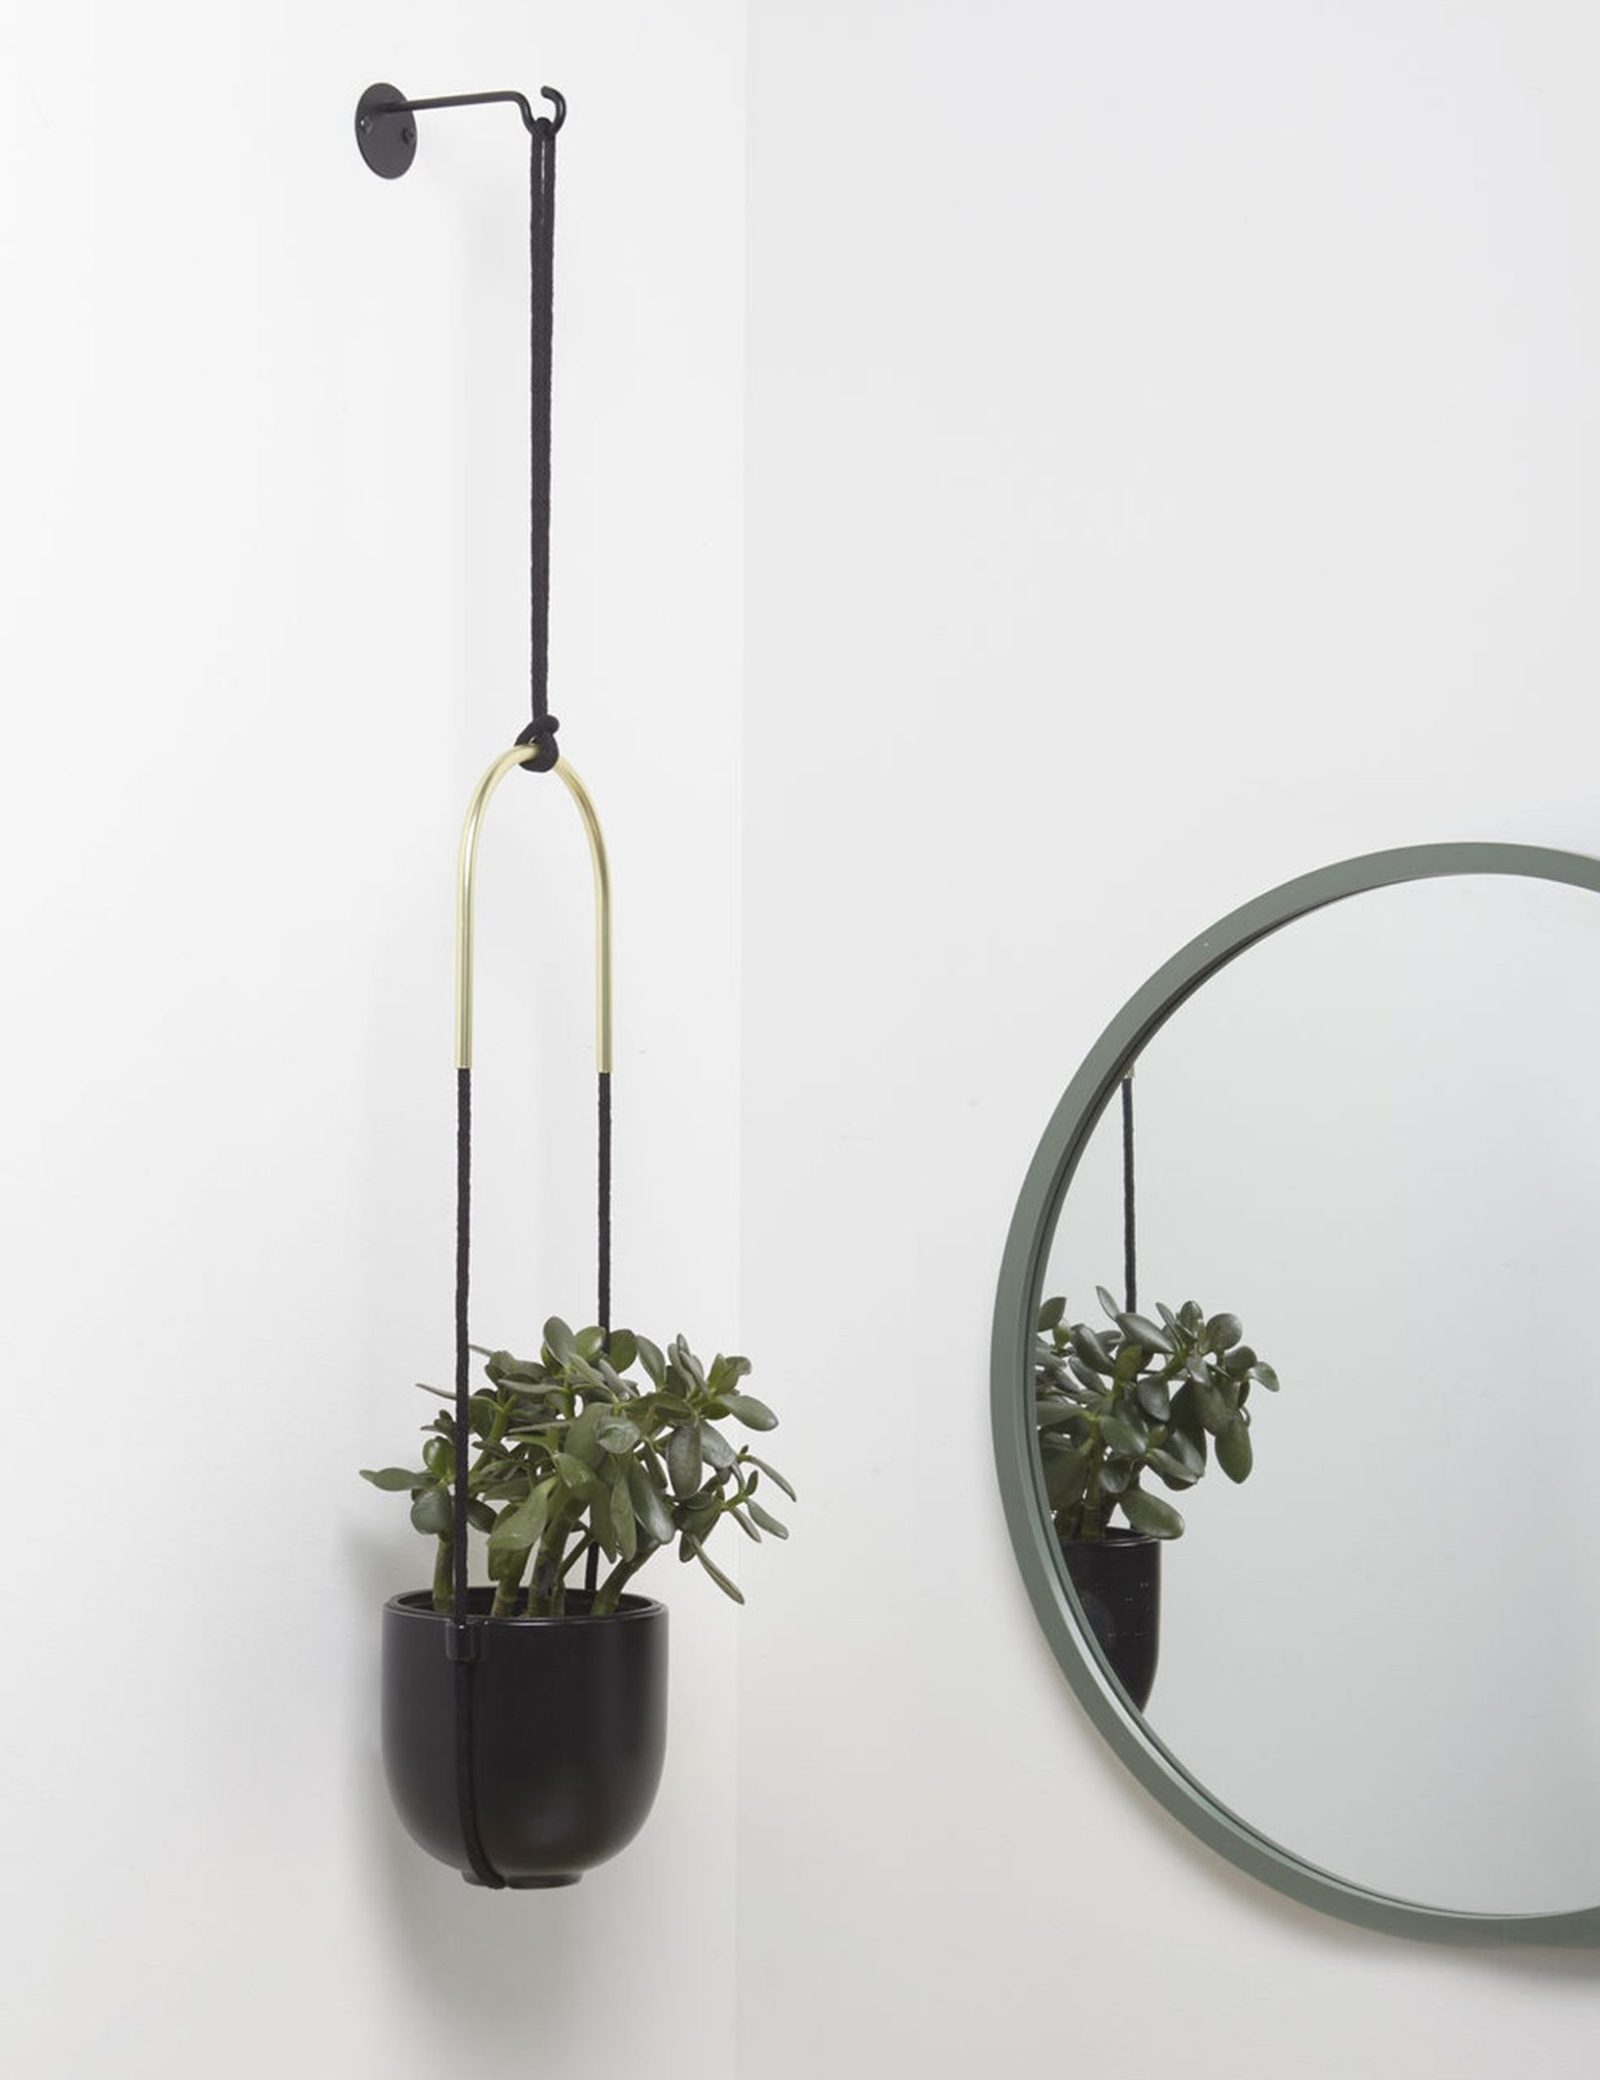 Brighten Up the Bathroom with a Small Hanging Planter